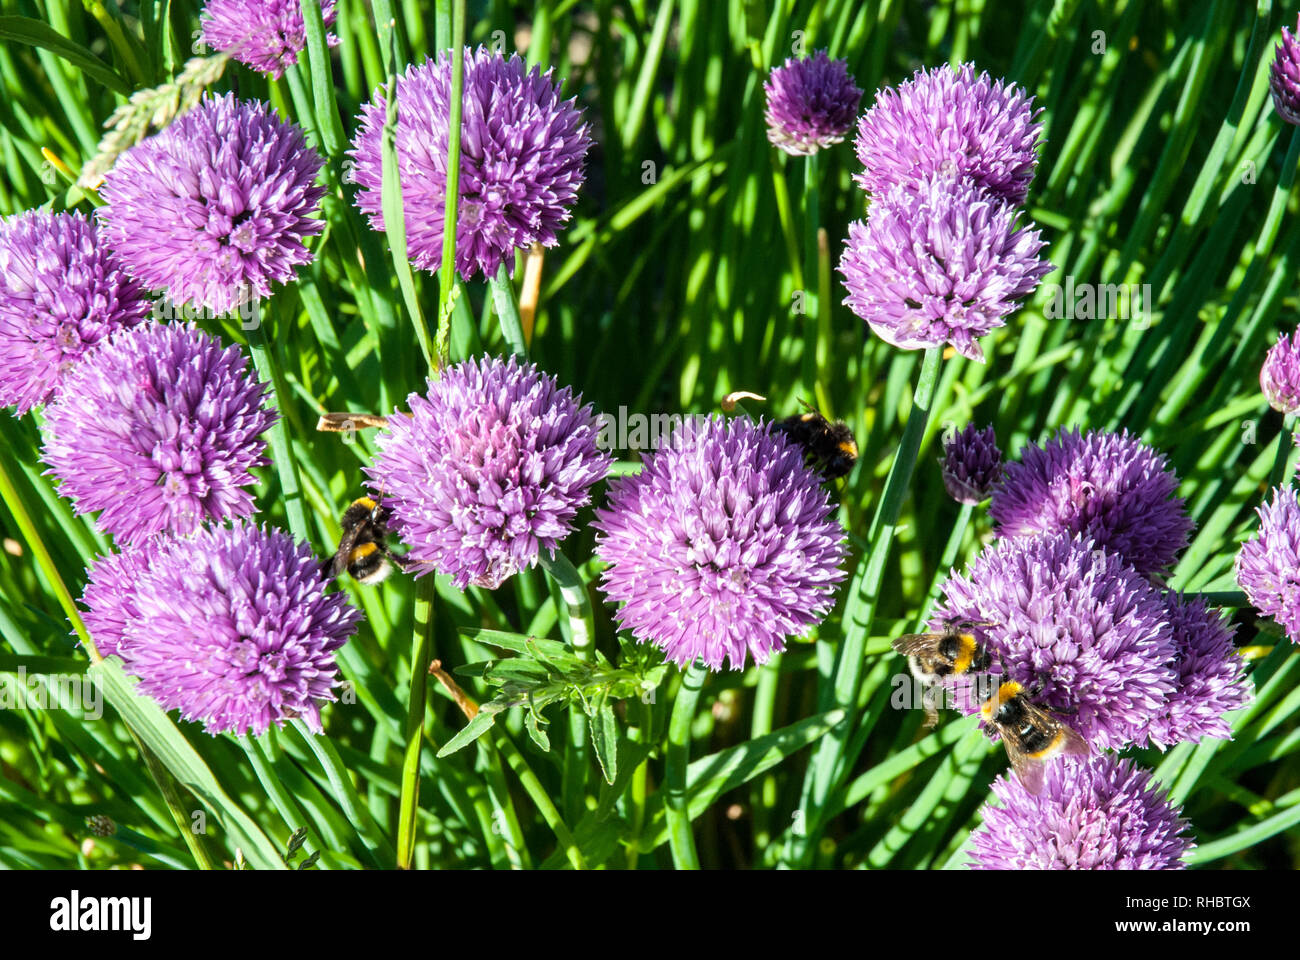 White tailed bumble bees gather nectar from bright purple chive flowers, allium schoenoprasum, in early summer sunshine. Stock Photo